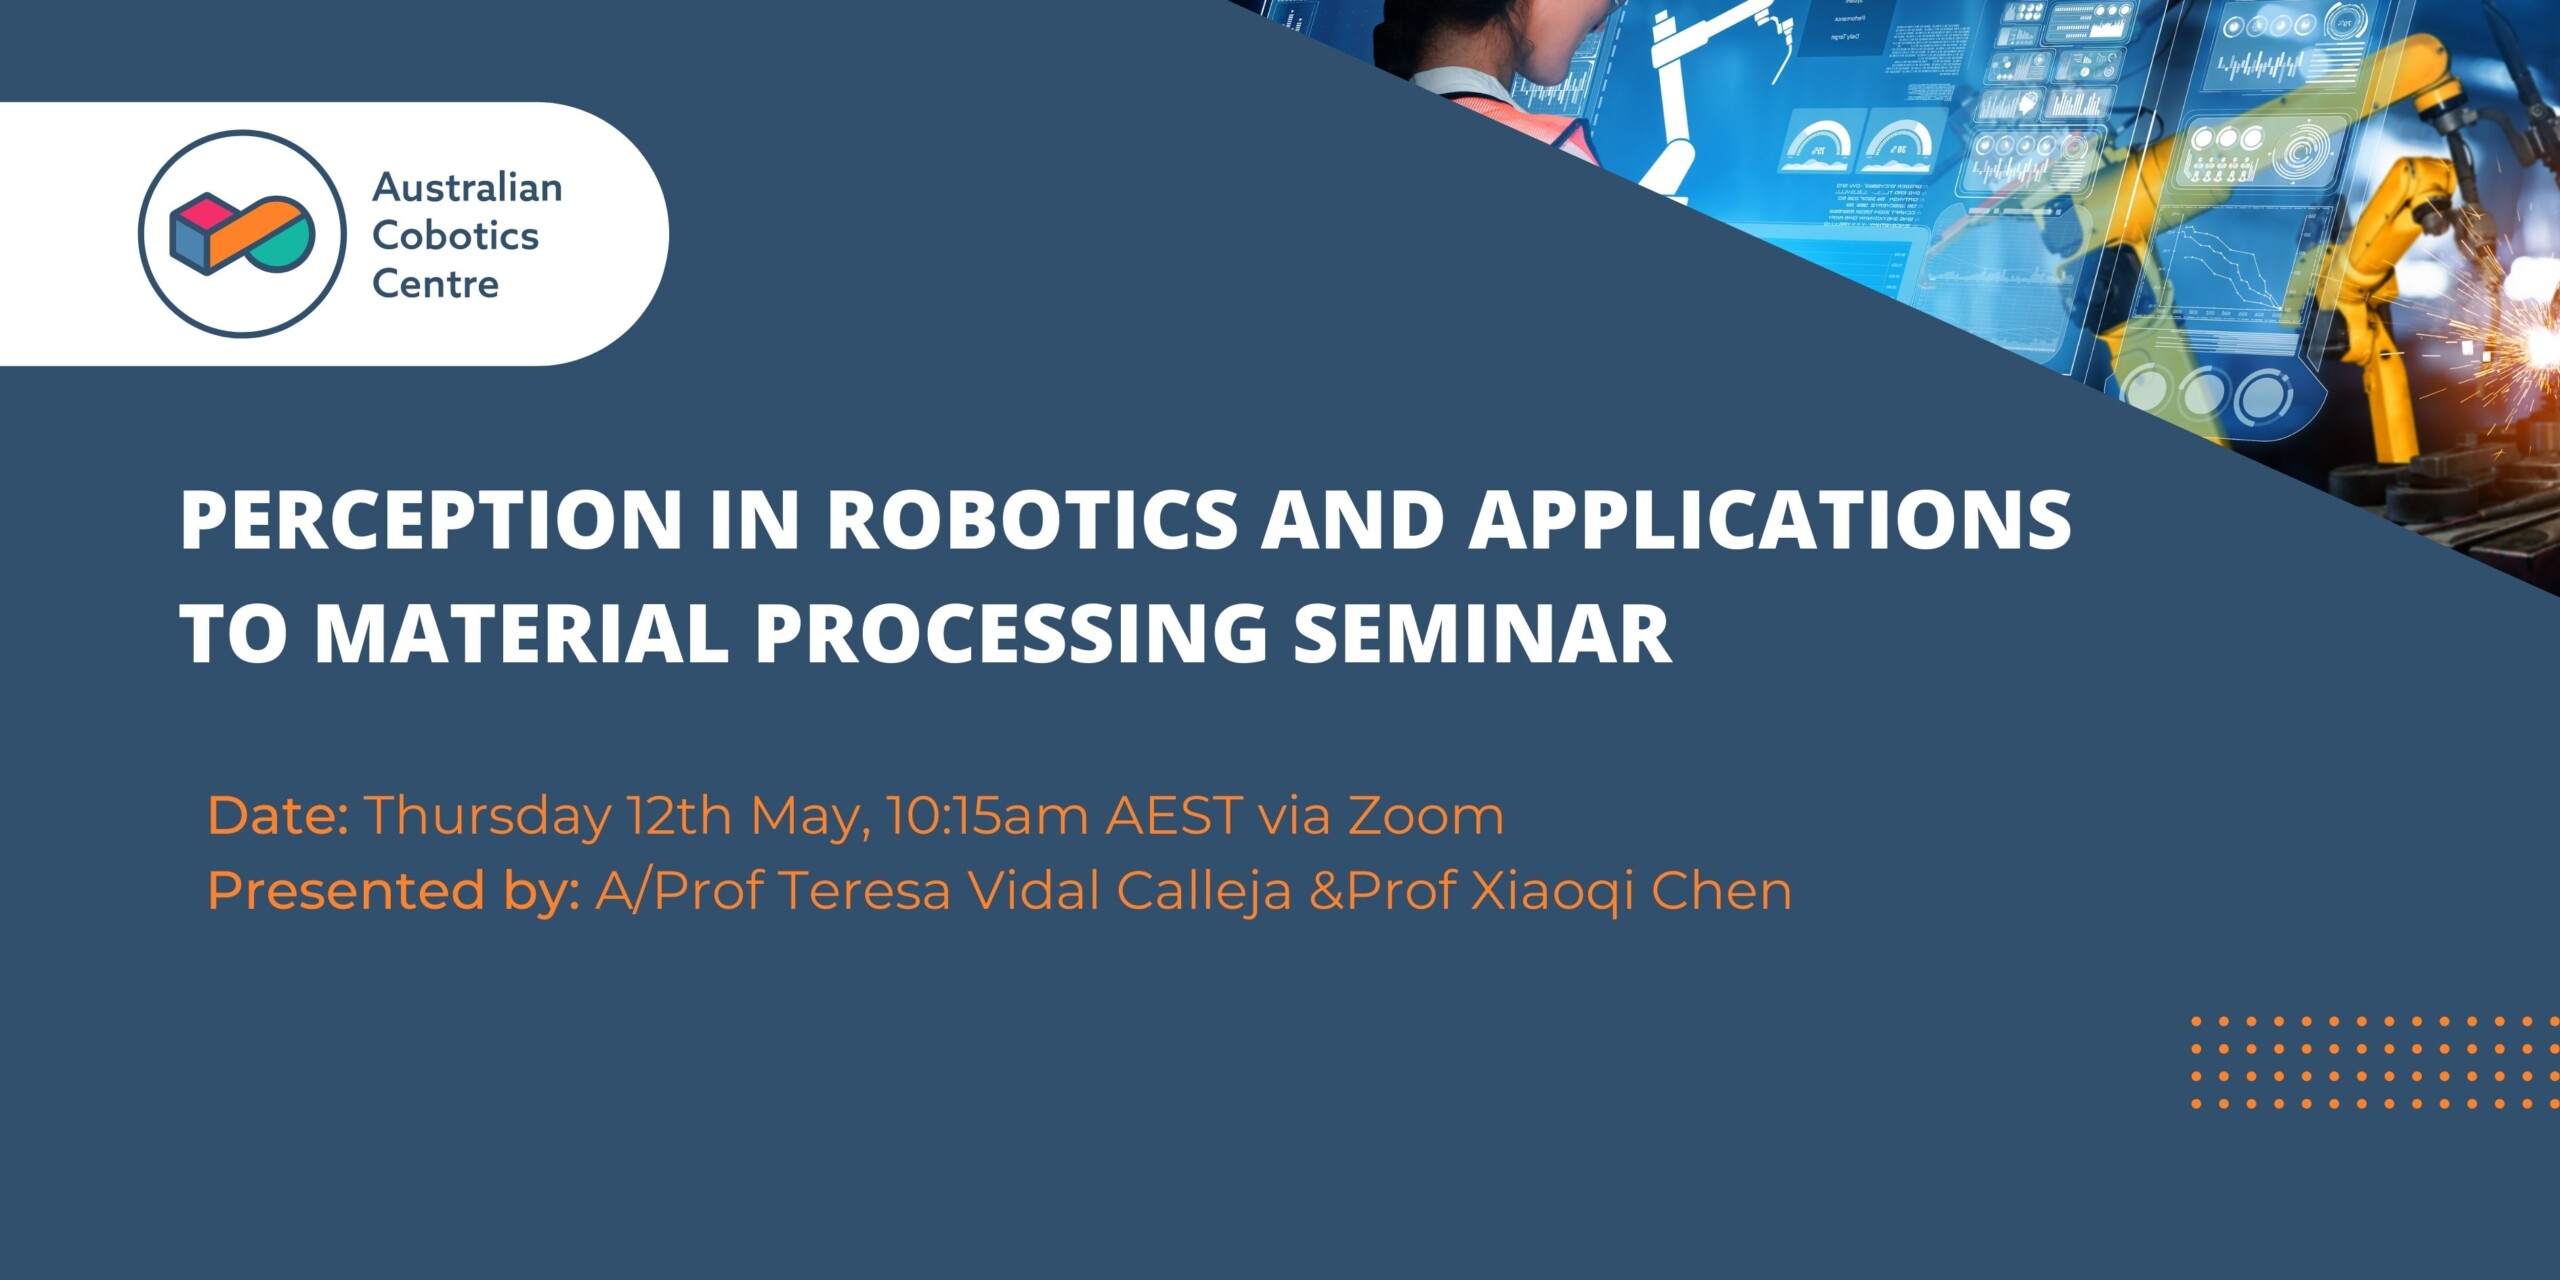 Perception in Robotics and Applications to Material Processing Seminar